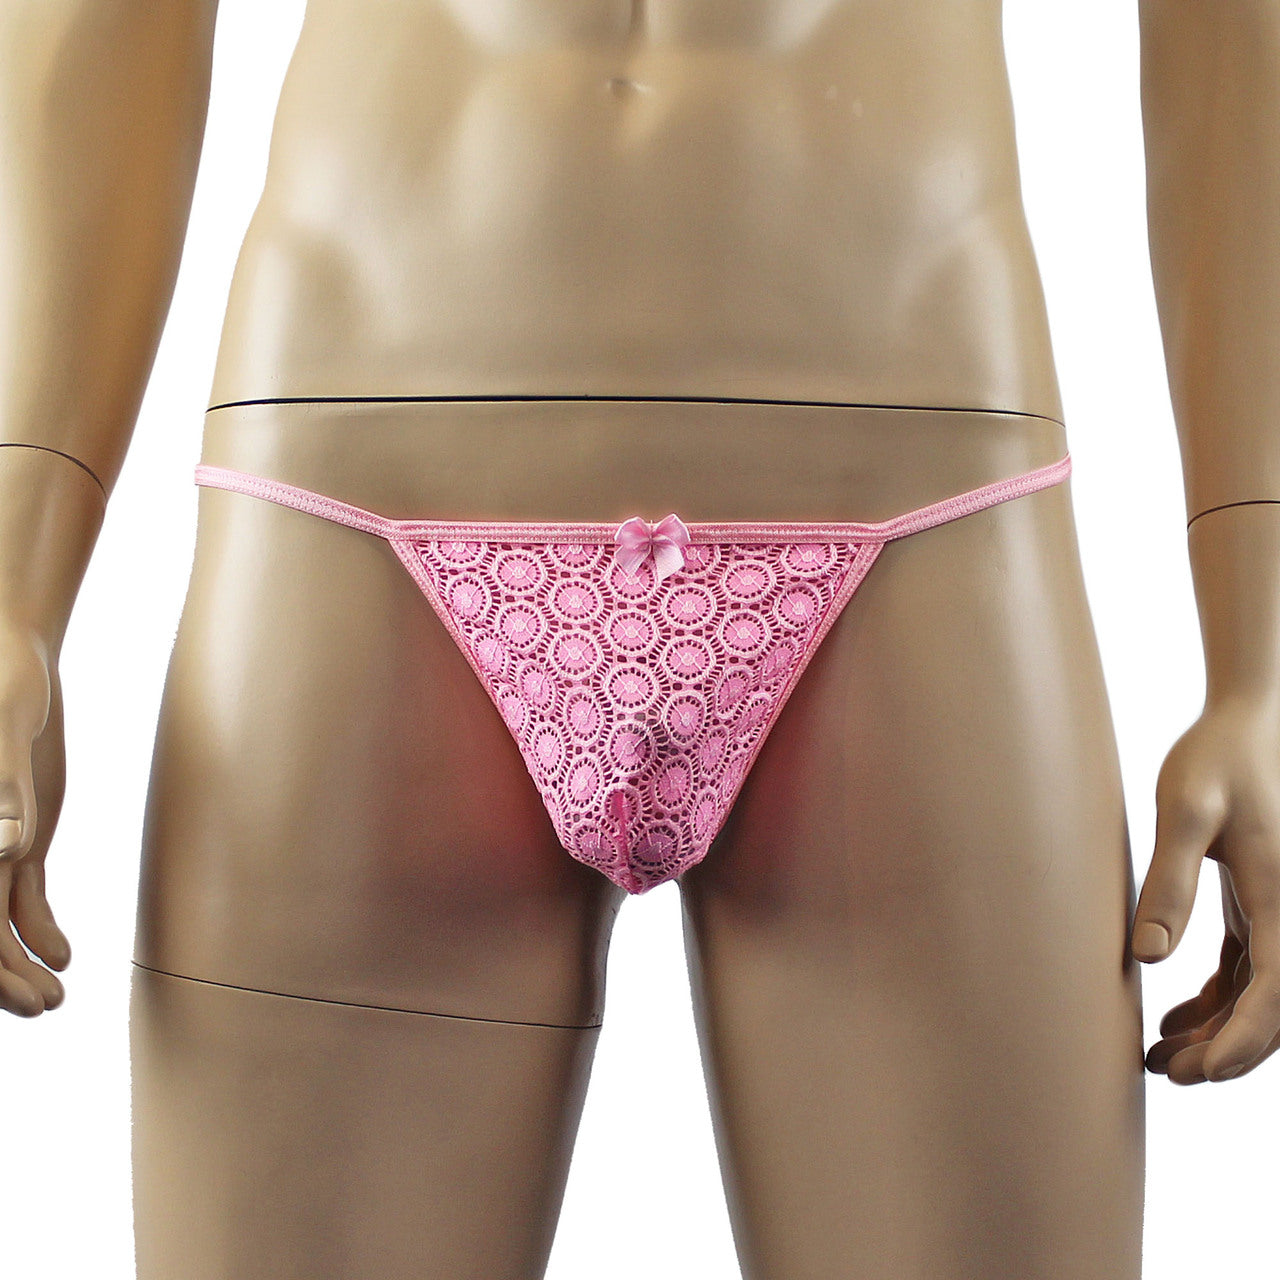 Mens Tease Circle Lace Pouch G string with Cute Bow Front Light Pink